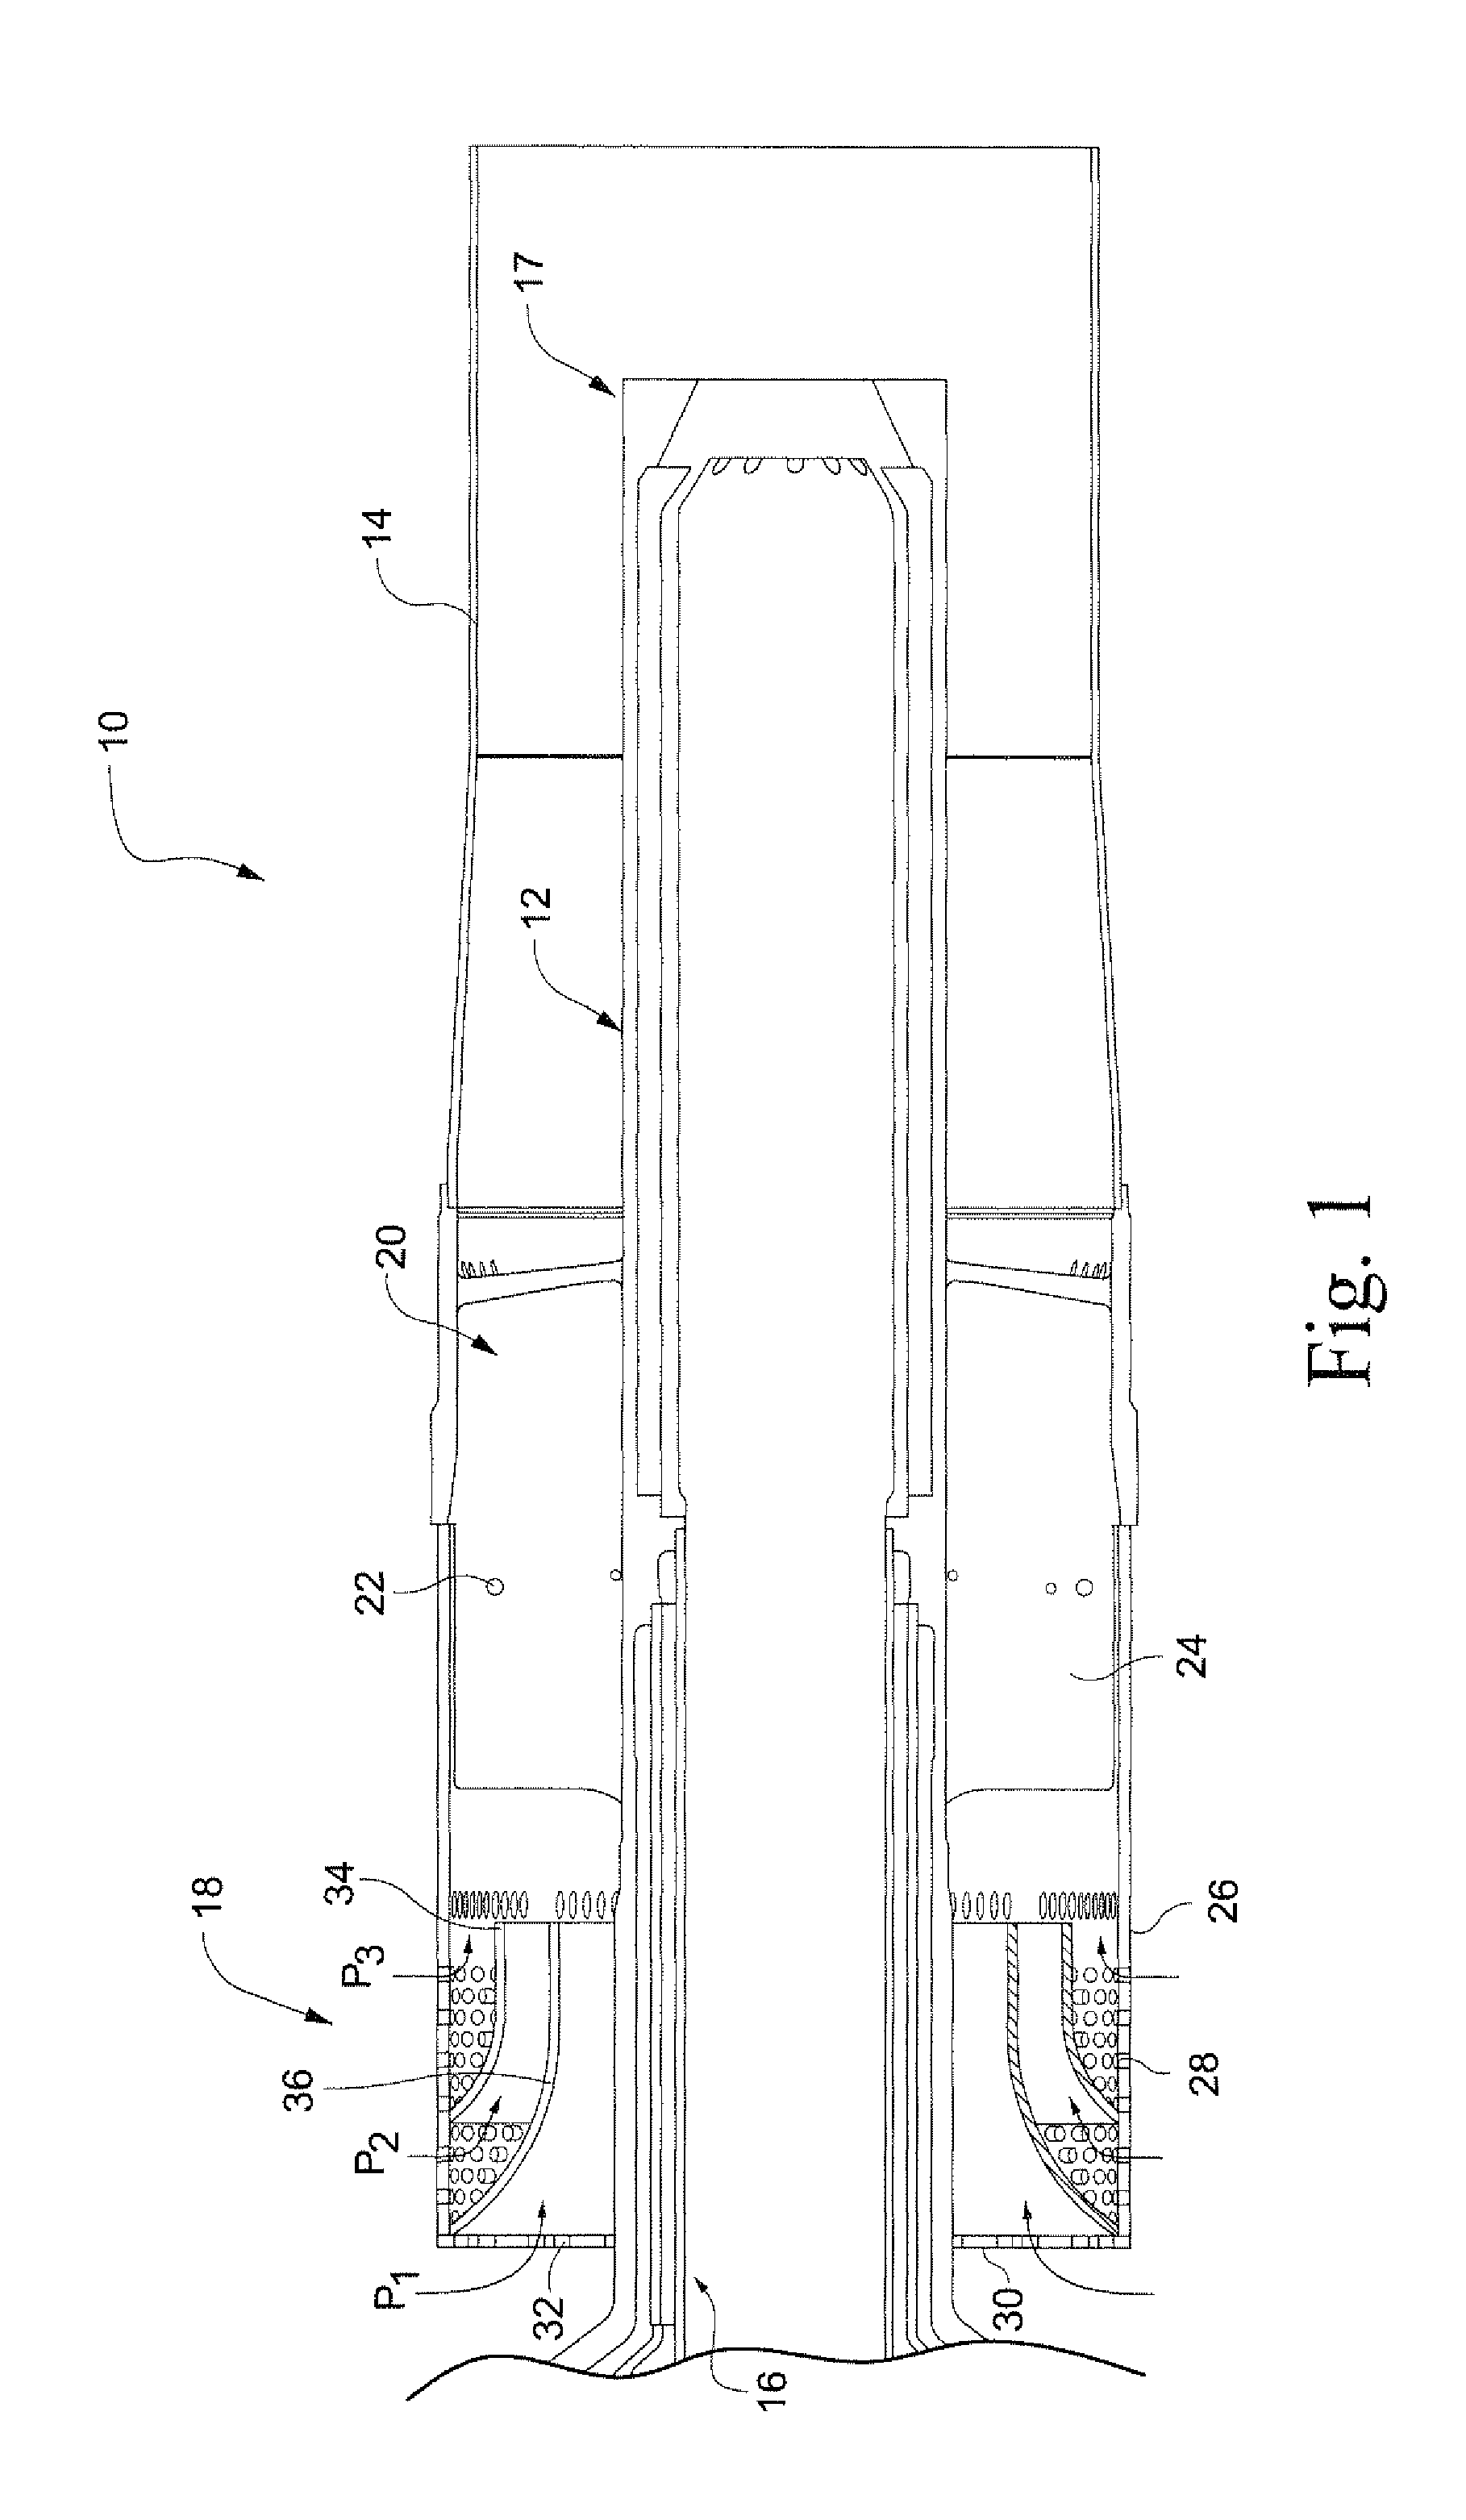 Integrated fuel nozzle and inlet flow conditioner and related method